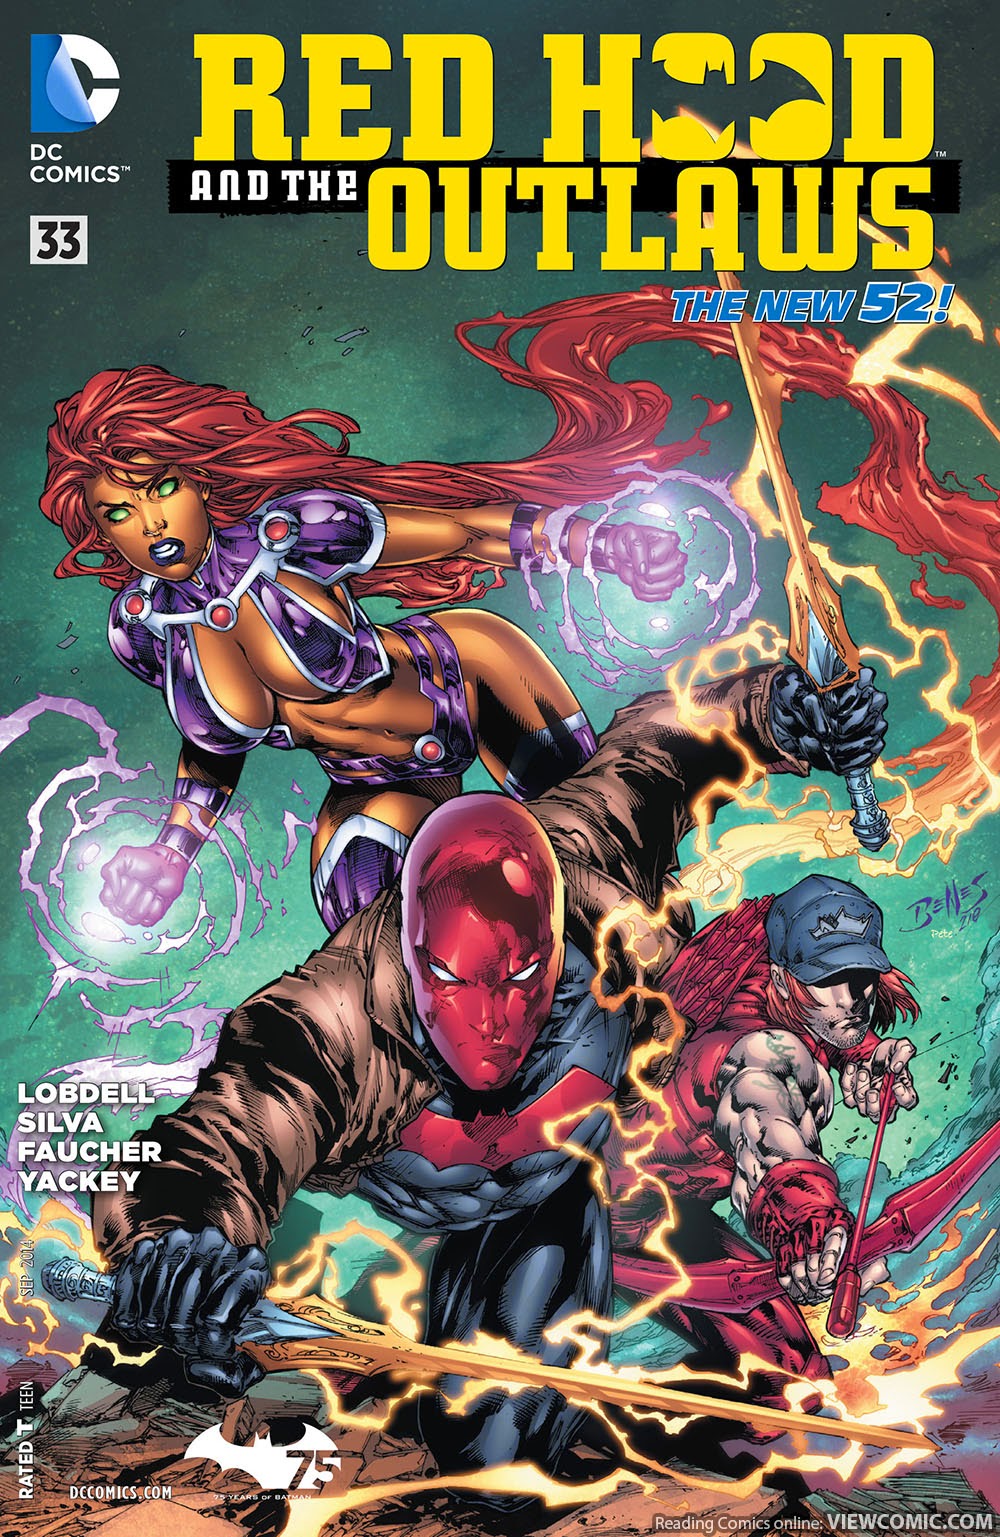 Red Hood And The Outlaws #13